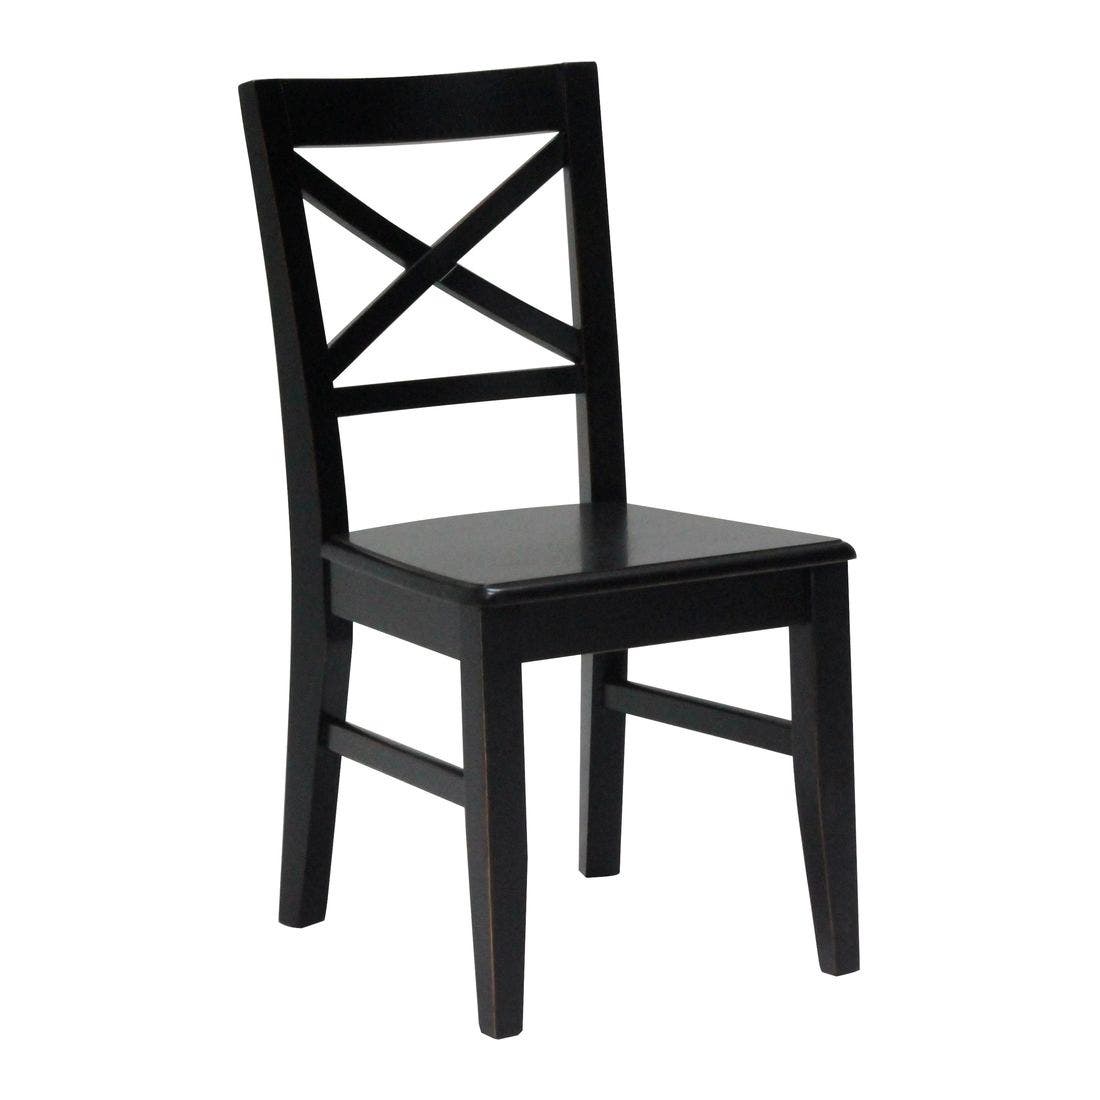 19150751-amonlo-furniture-dining-room-chairs-01